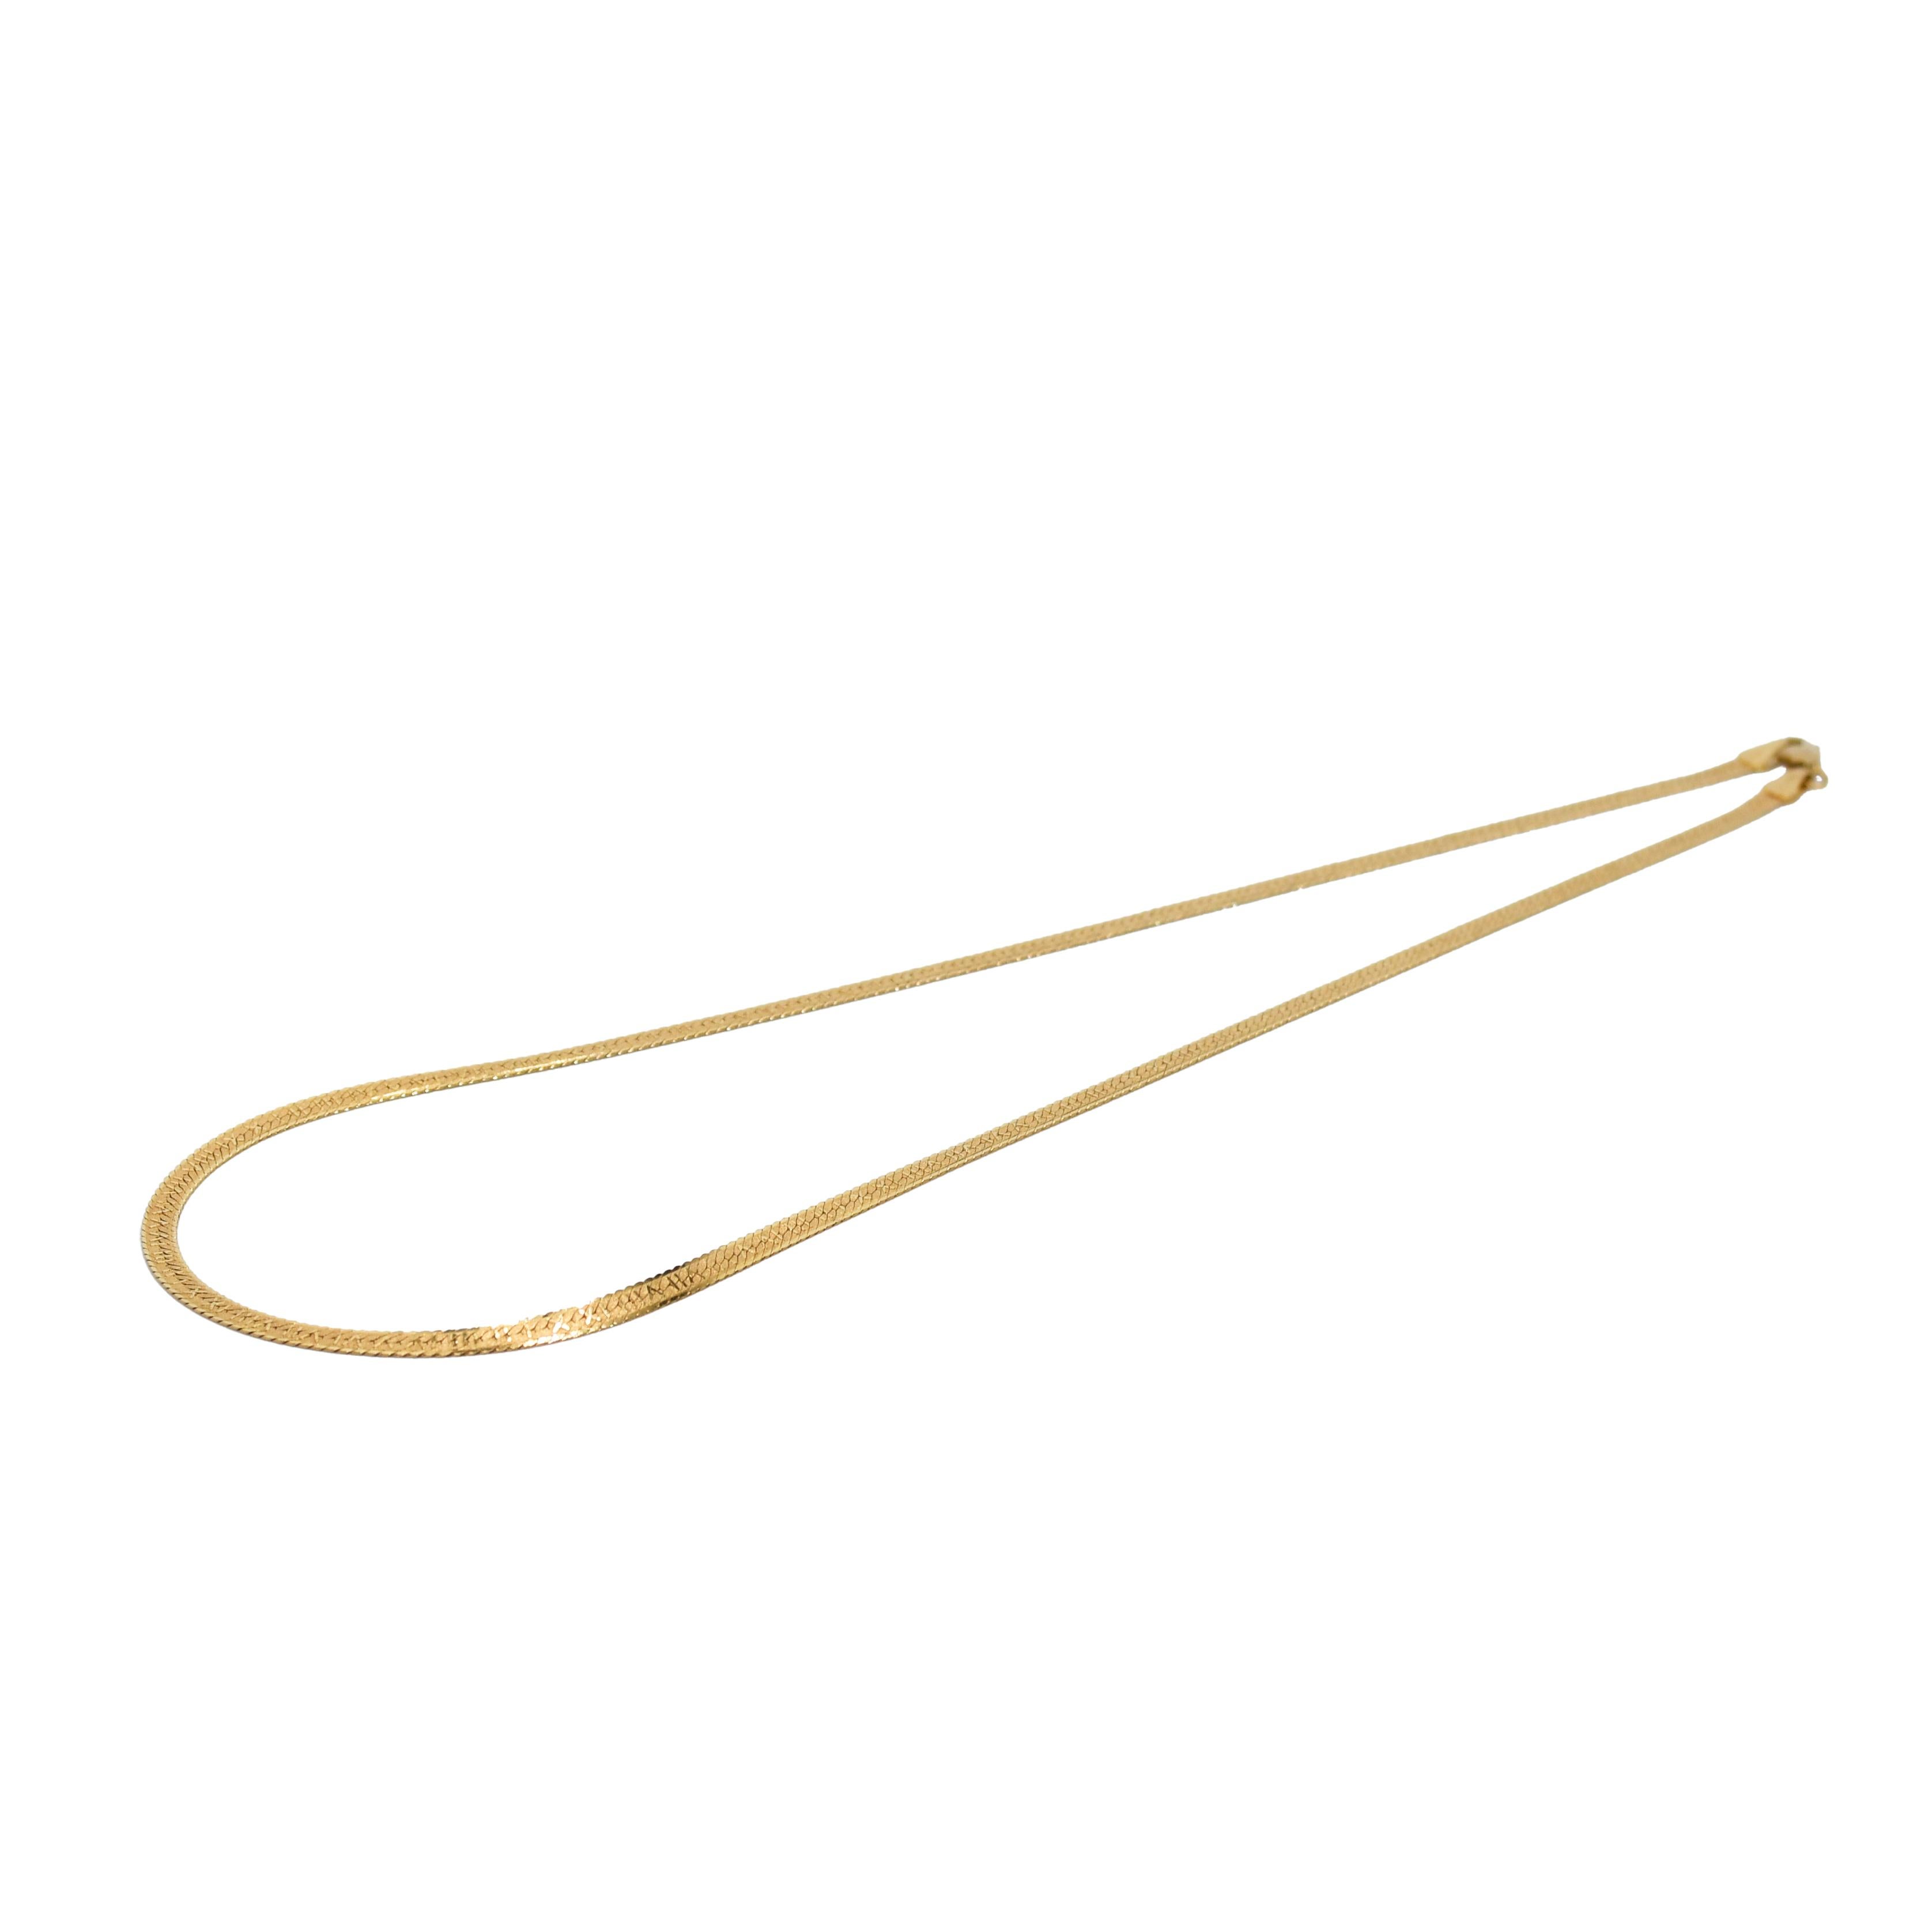 18K Yellow Gold Herringbone Chain

Introducing a luxurious and timeless piece of jewelry, the 18k Yellow Gold Herringbone Chain. Crafted with the utmost precision and elegance, this exquisite necklace is a symbol of sophistication and style.

The